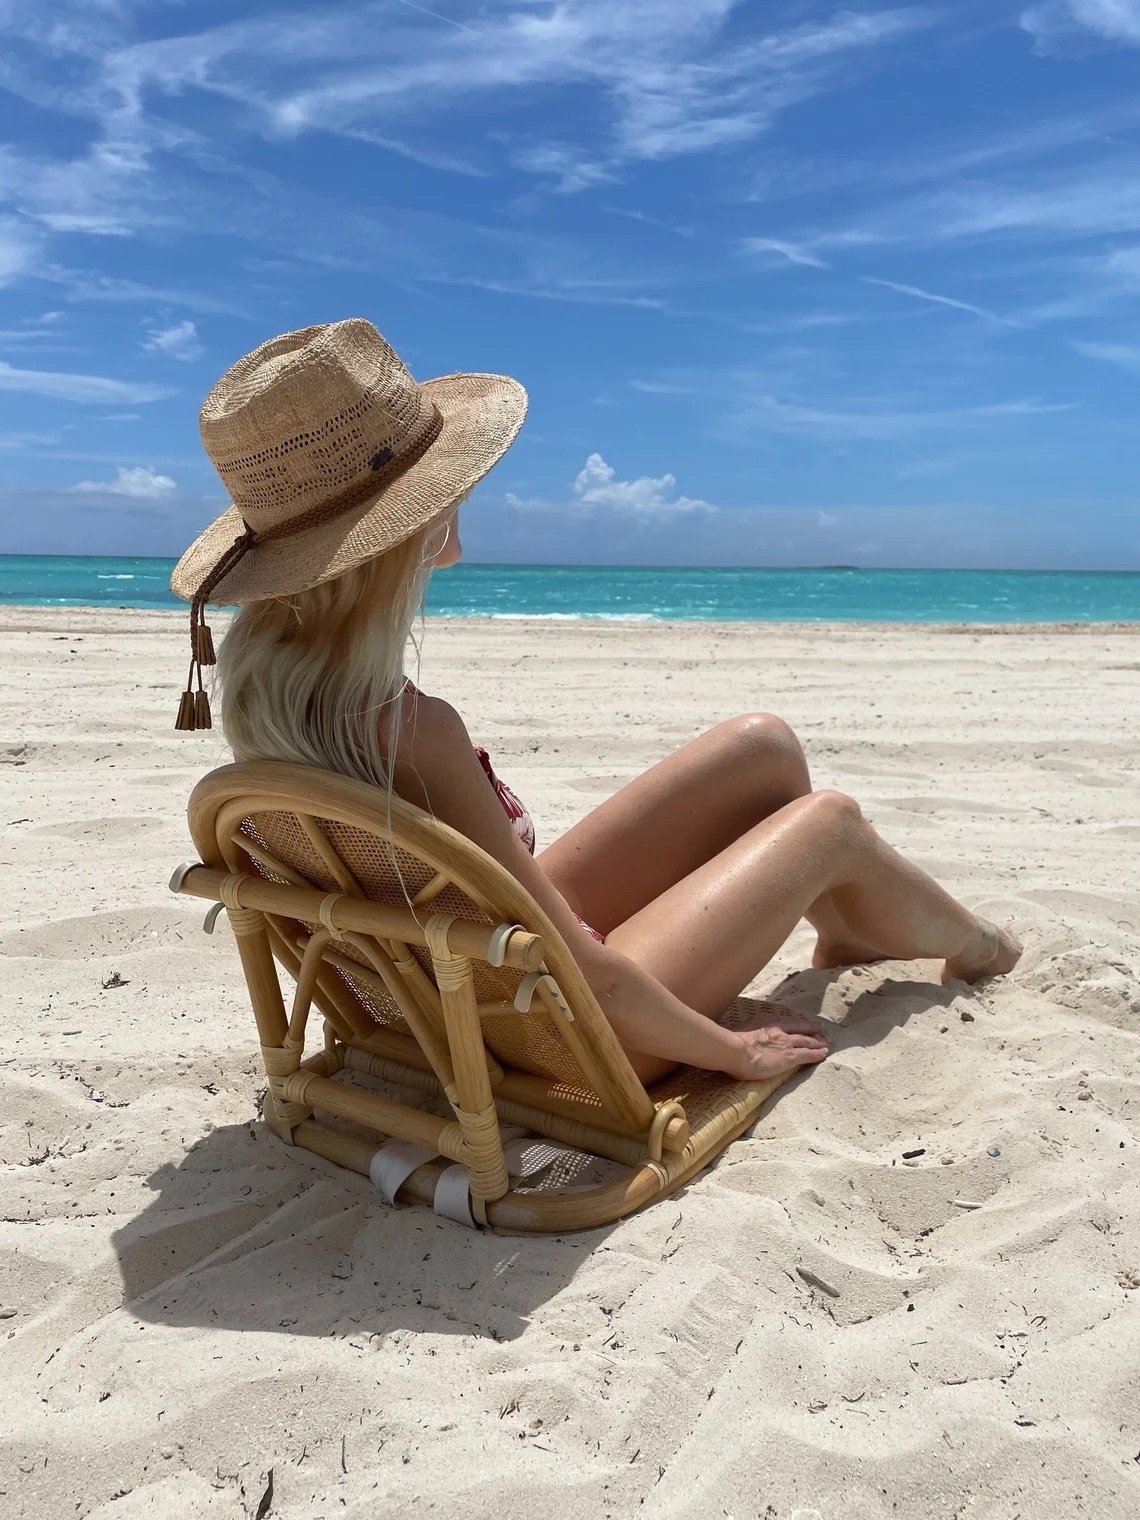 A person wearing a sun hat and swimsuit sits on a reclining beach chair facing the ocean on a sandy beach under a bright blue sky.